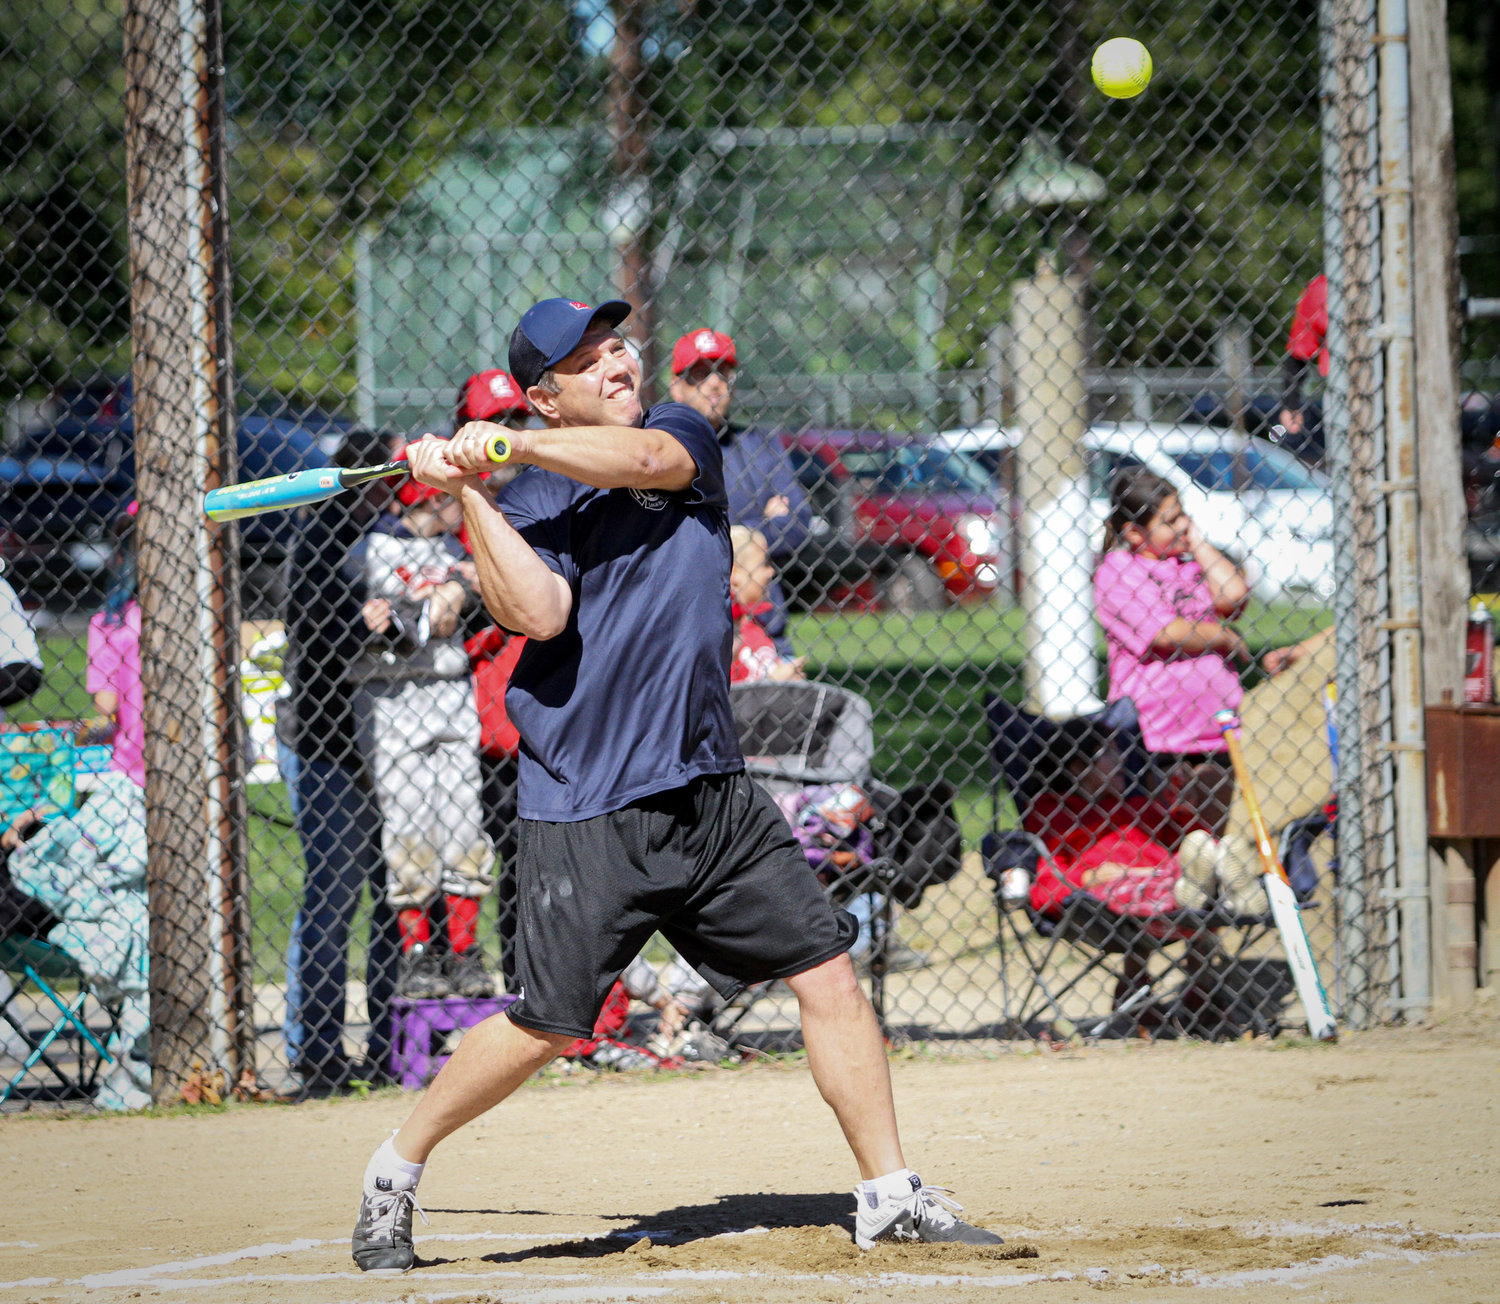 EPFD Captain Doug Drainville connects at the plate